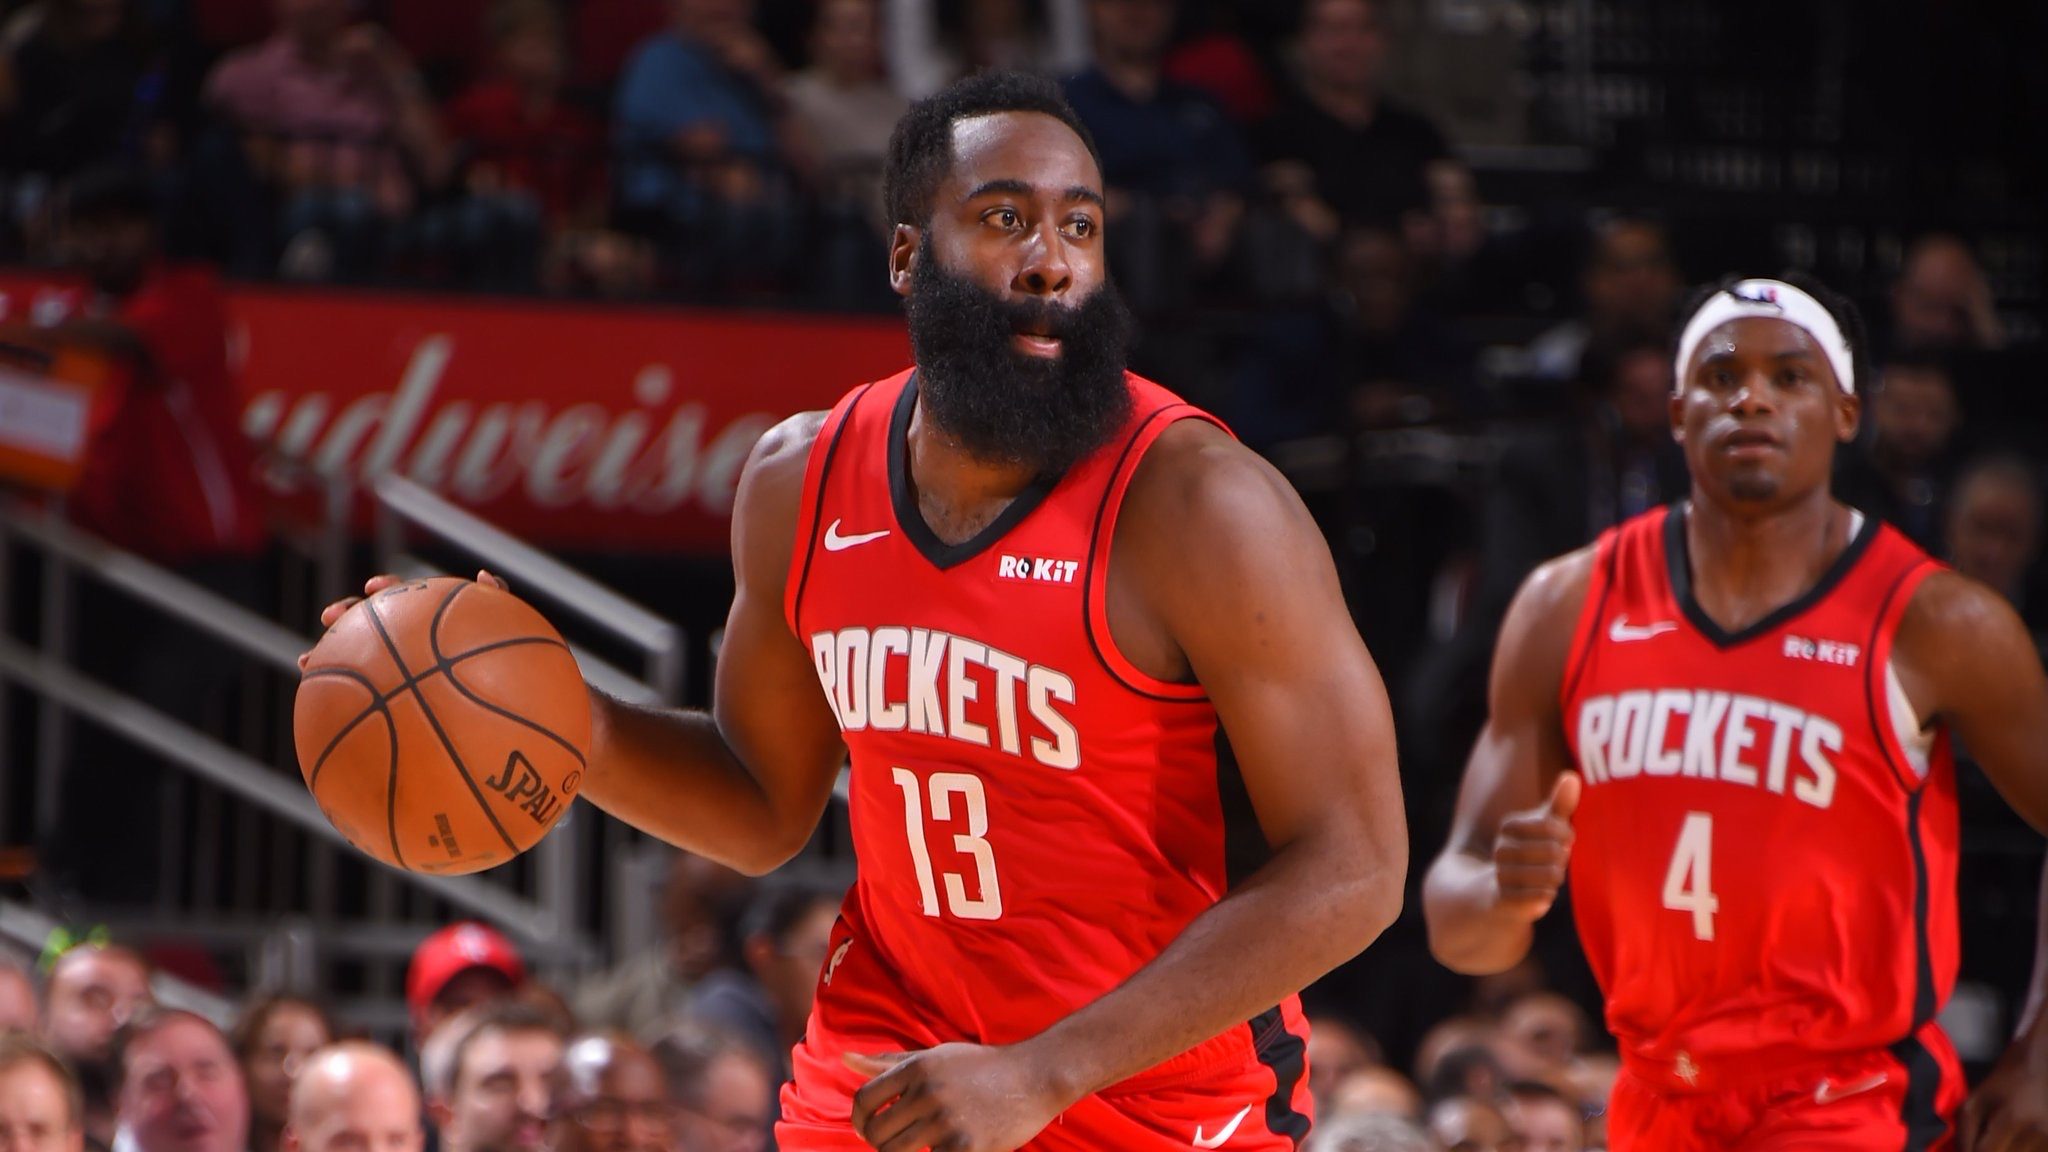 Harden to Landry Shamet: How much do you want for the No.13 Nets jersey?